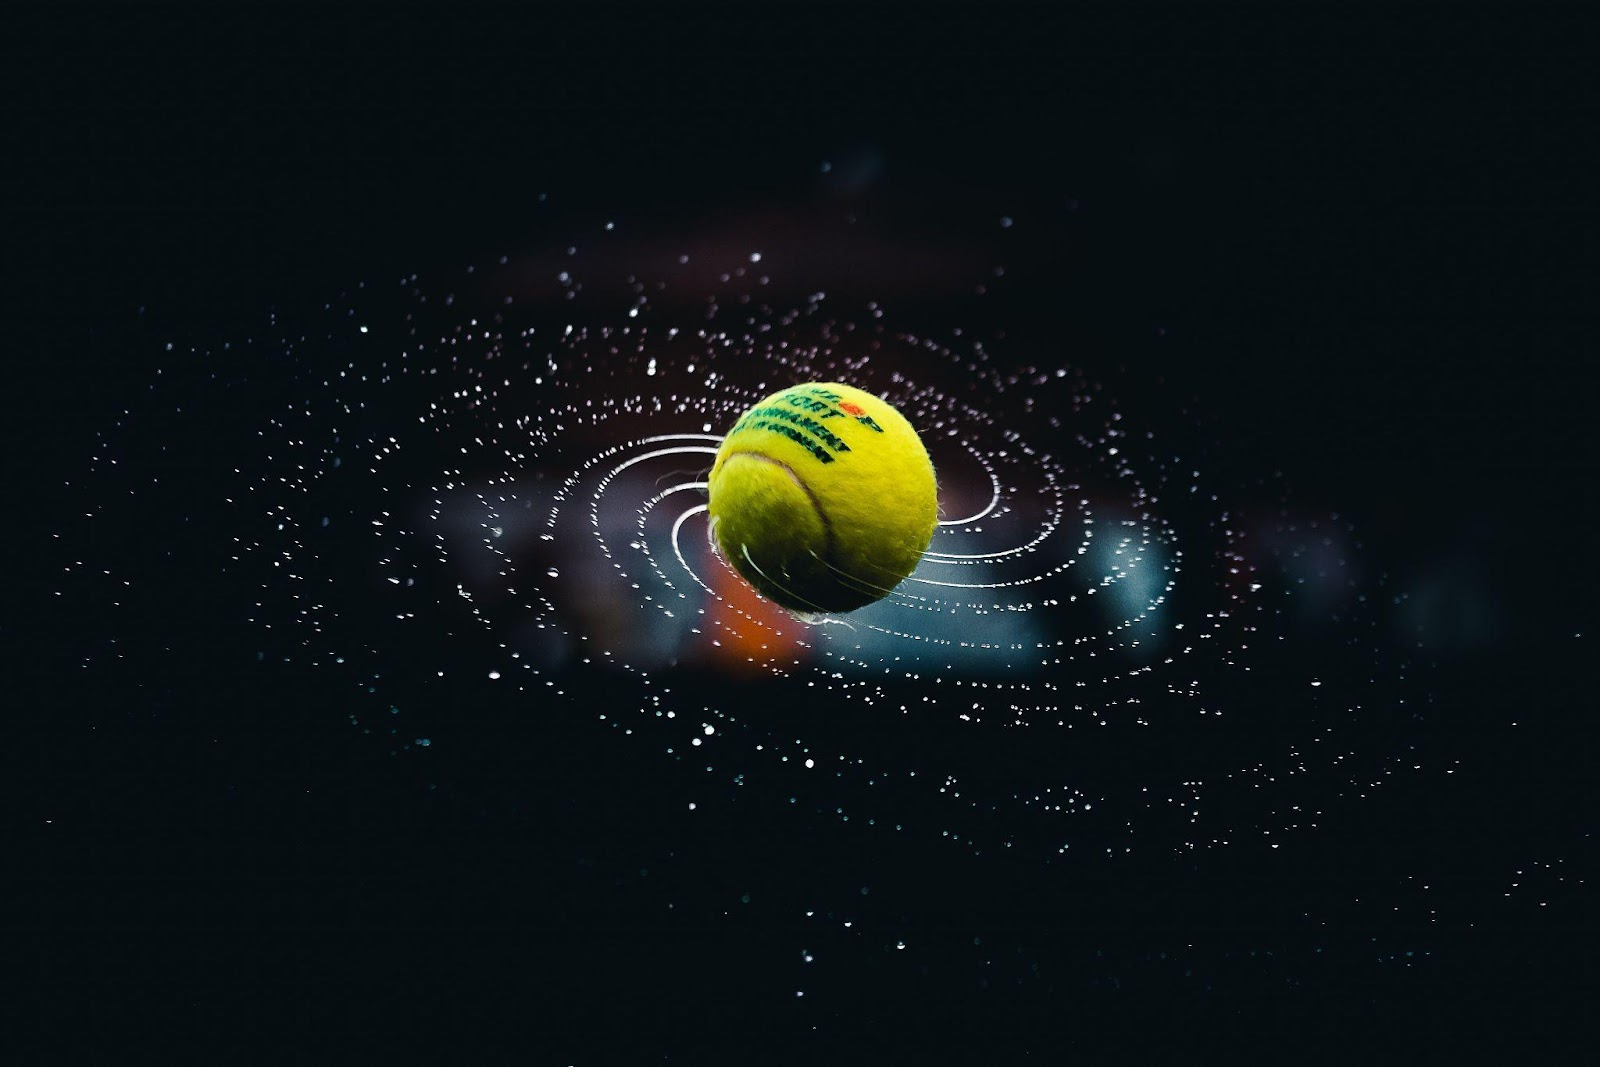 Tennis is one of the great sports for improving well-being